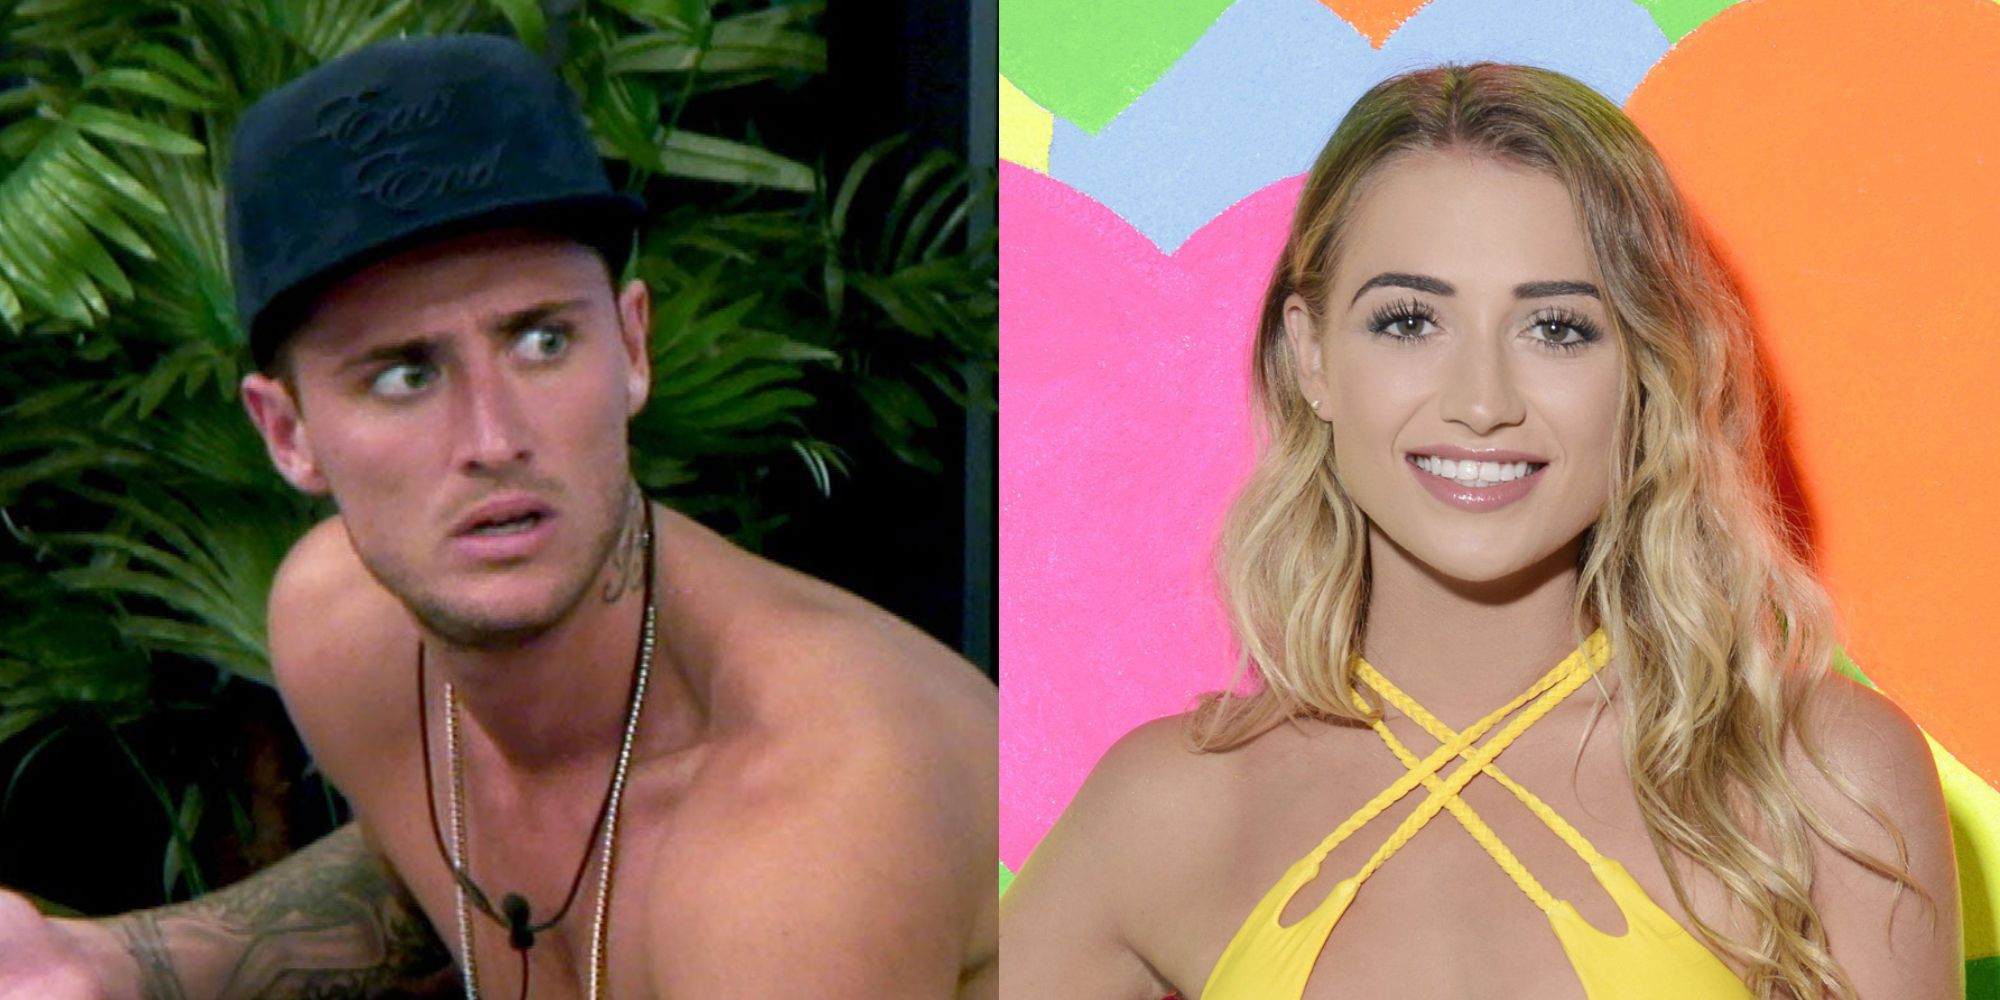 Stephen Bear from Celebrity Big Brother UK and Georgia Harrison from Love Island UK